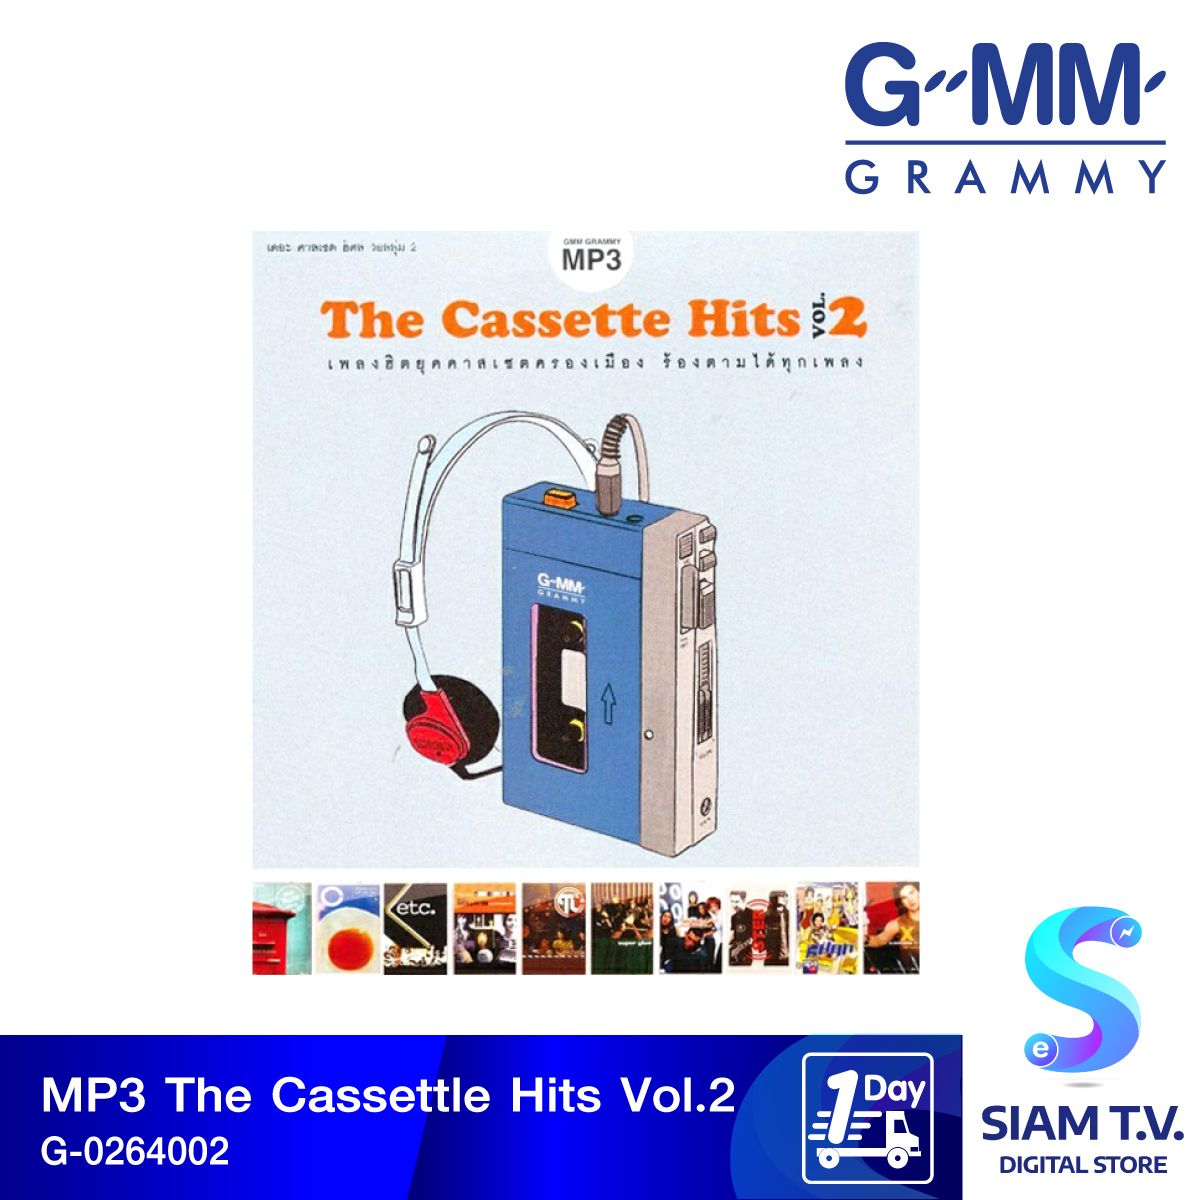 GMM GRAMMY MP3 The Cassettle Hits Vol.2